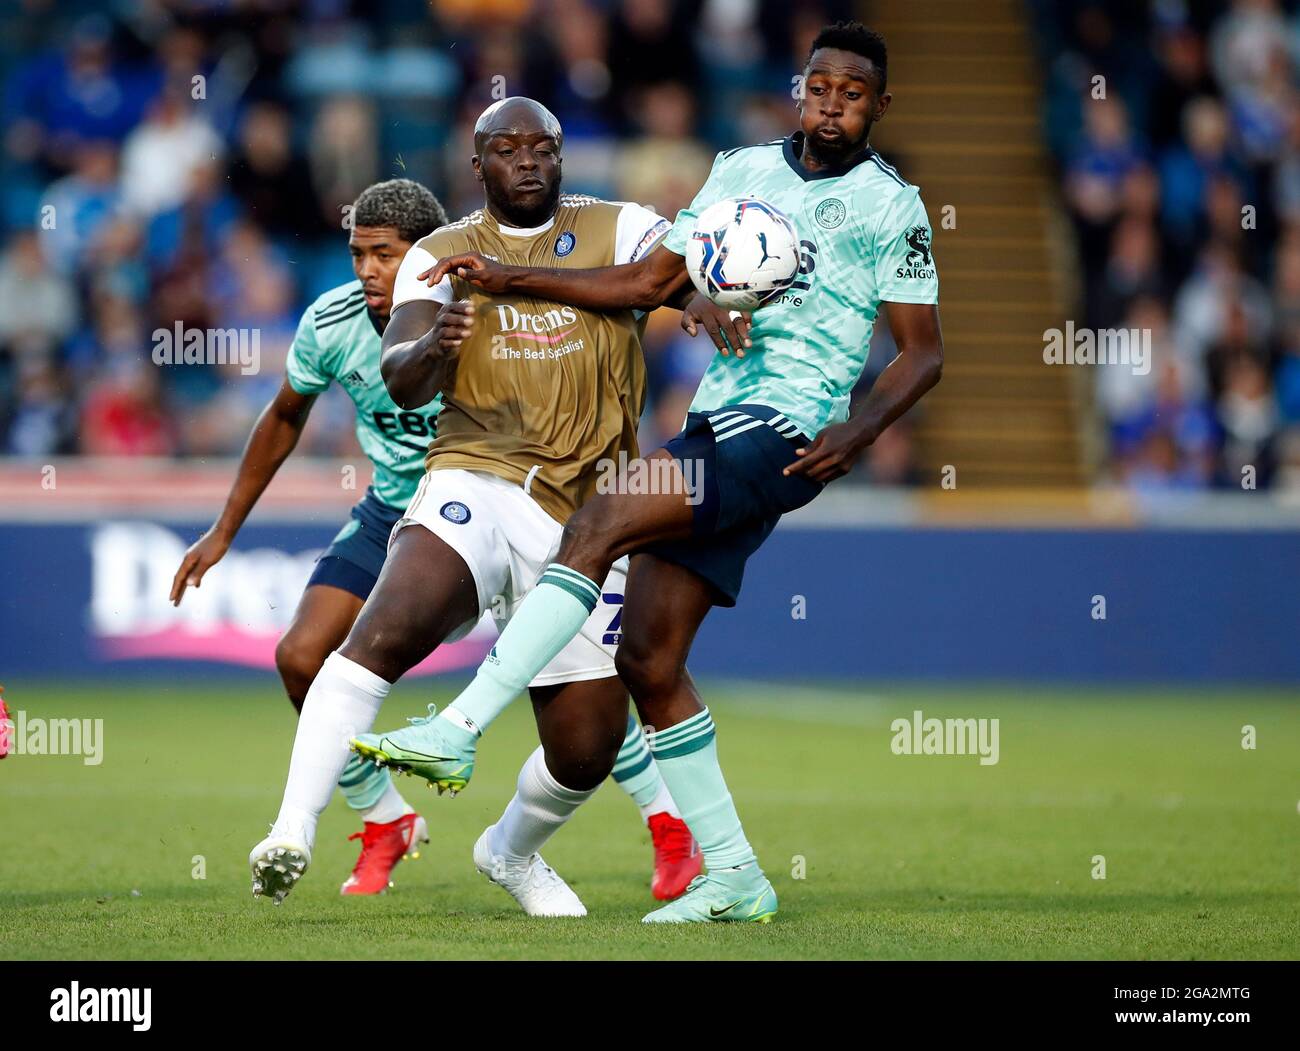 Wycombe vs leicester city